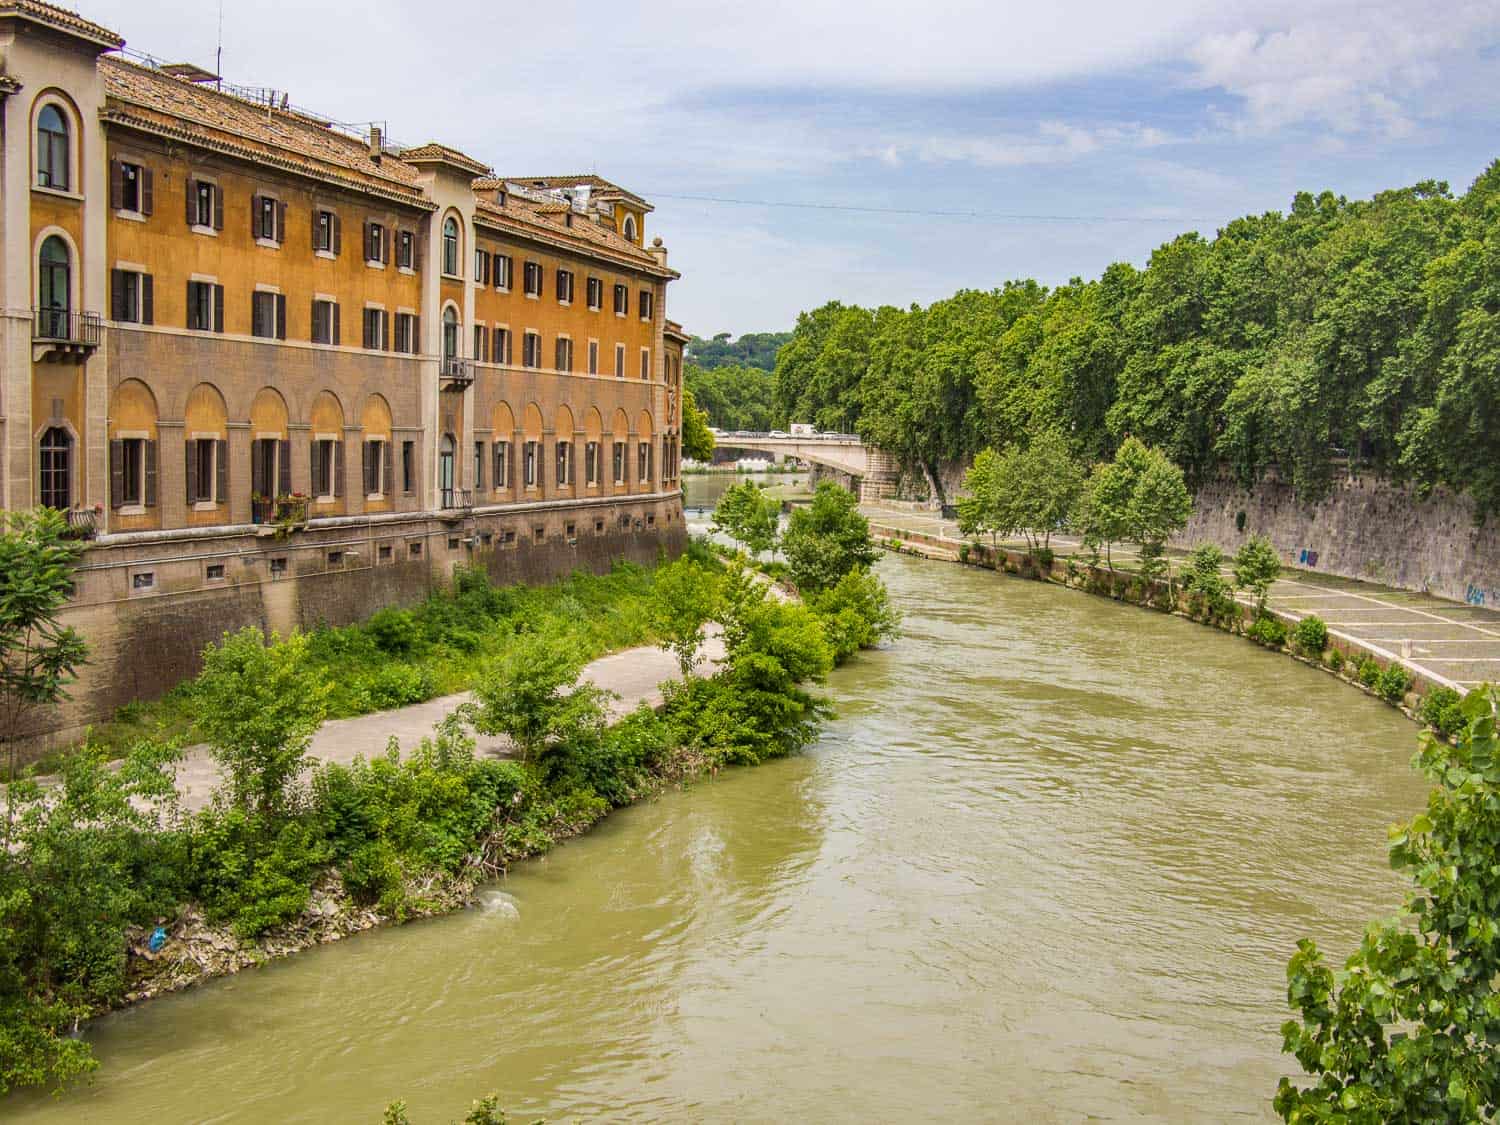 Tiber island in Rome connects Trastevere to the Jewish Ghetto